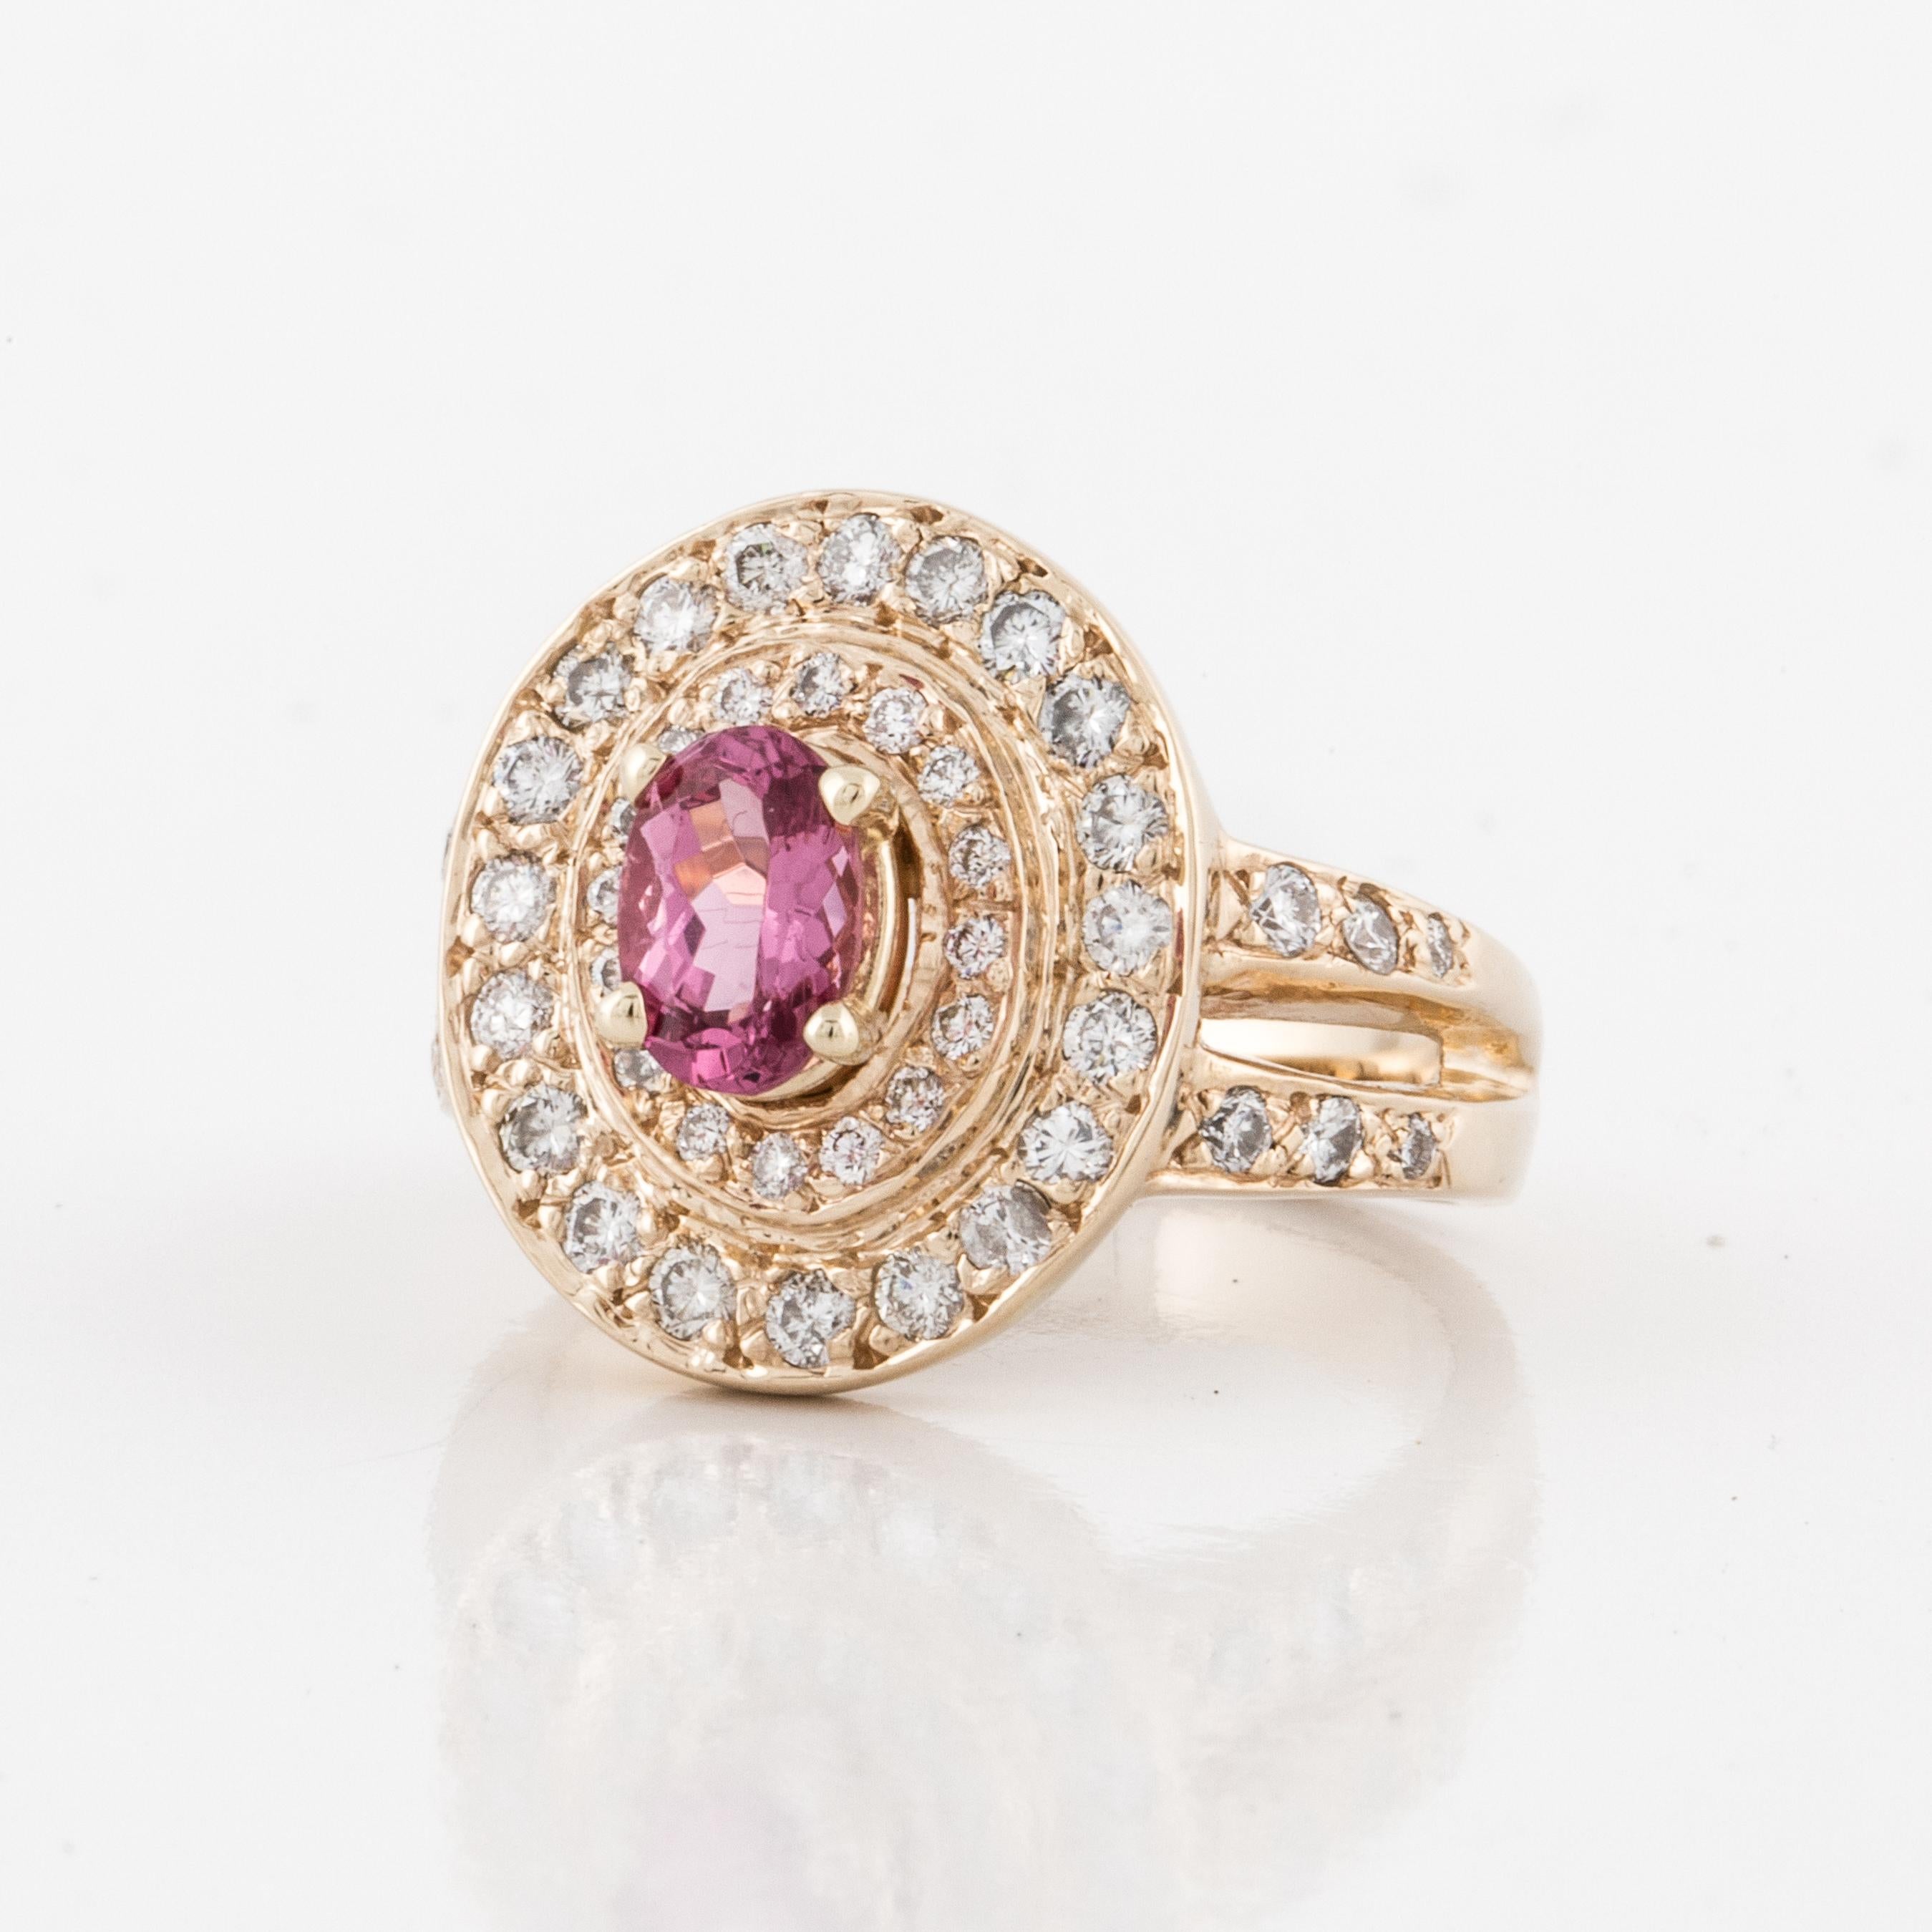 14K yellow gold ring featuring a pink spinel and diamonds.  The oval pink spinel totals 0.90 carats.  There are forty-eight (48) round diamonds totaling 1.0 carats; they are G-H in color and VS1-2 in clarity.  Ring is currently a size 7-1/4. 